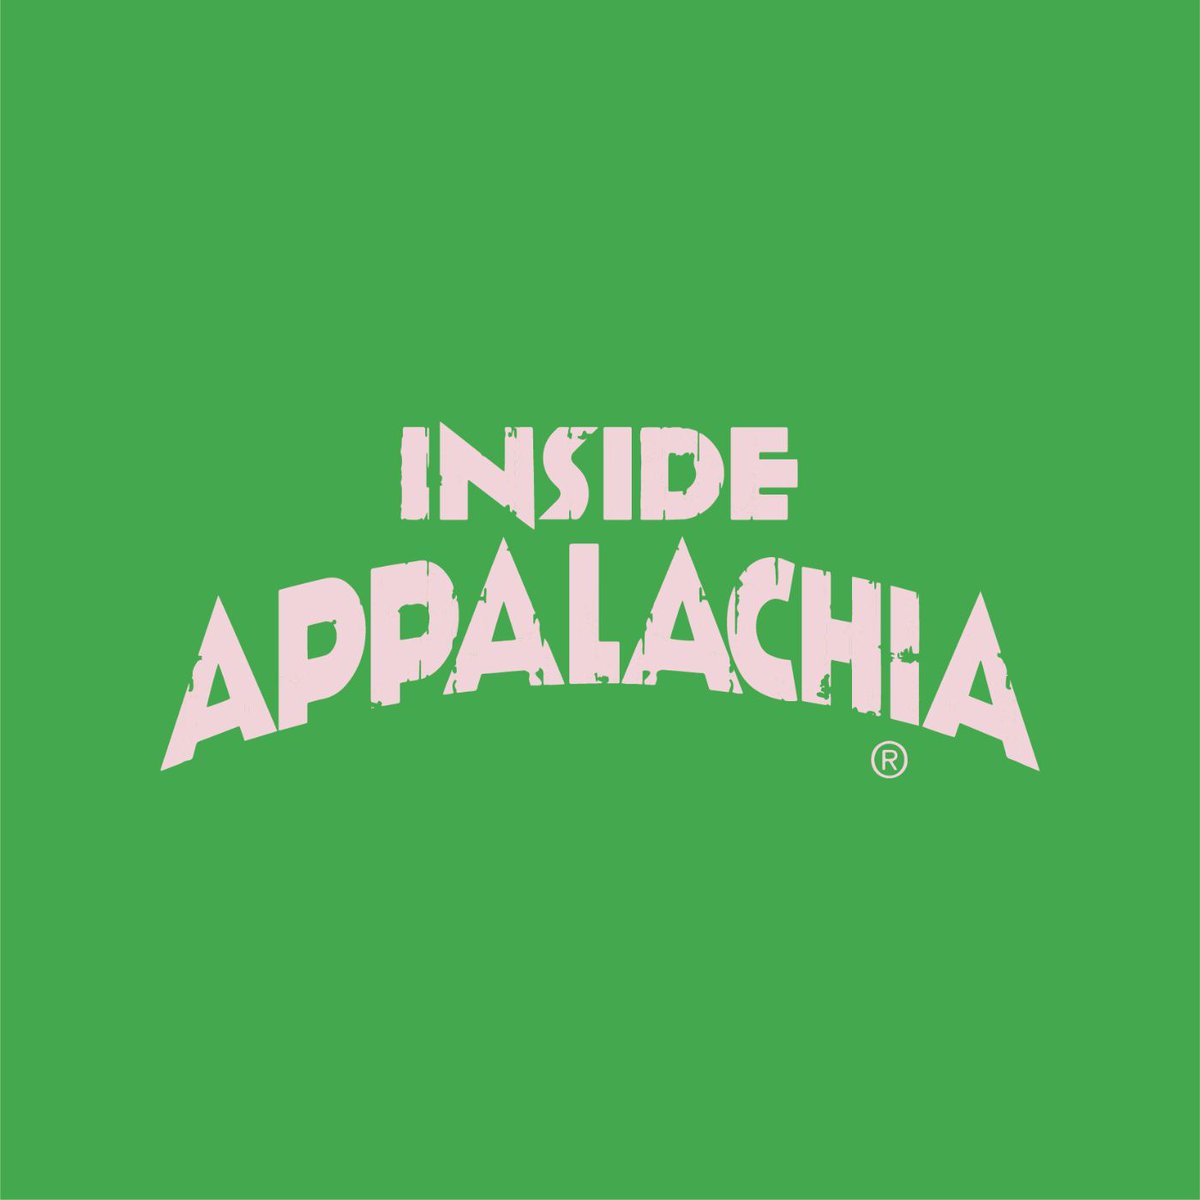 This week on #InsideAppalachia 🌄, a chef has created a hidden culinary hot spot in Asheville, NC that’s attracting national attention for its eclectic menu and Filipino hospitality. We also hear from famed thru-hiker Jennifer Pharr Davis. Listen SUNDAY at 7AM & 6PM on @wvpublic.